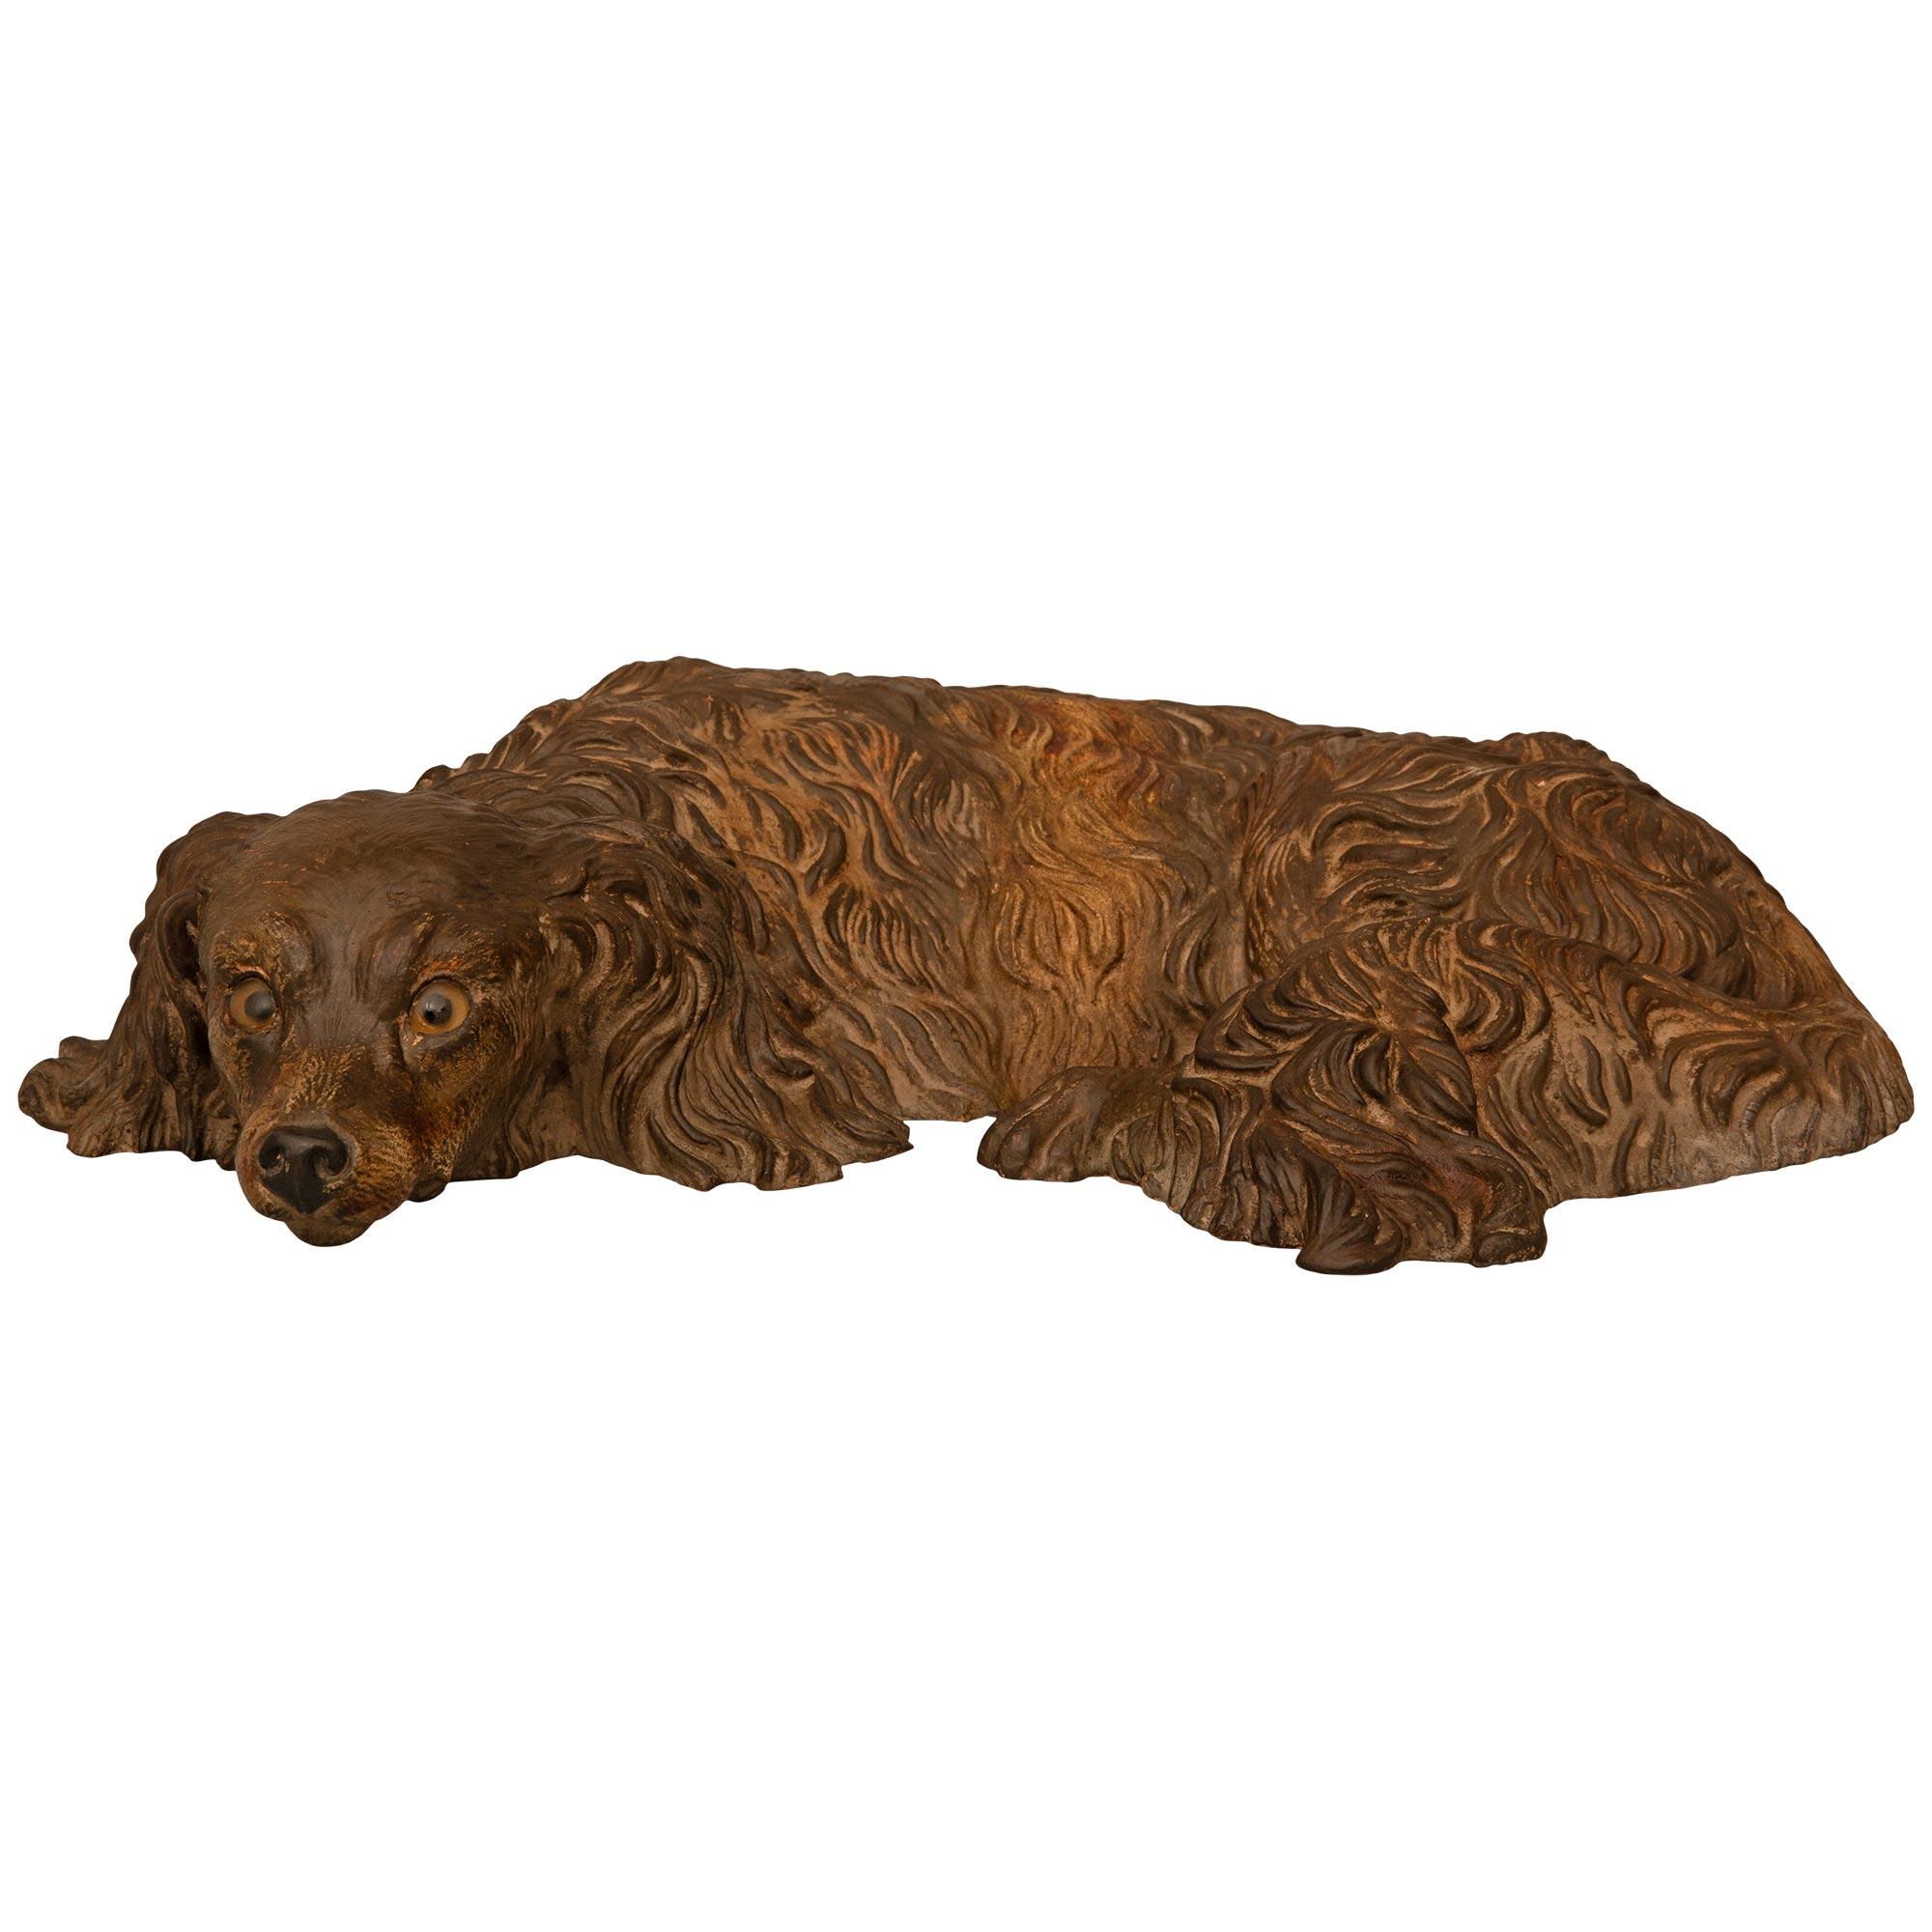 A wonderfully decorative and most charming English 19th century Terra Cotta earthenware statue of a dog. The small English Spaniel is laying down with an exquisite expression and fur all spread out. The dog has a welcoming gaze and exceptional